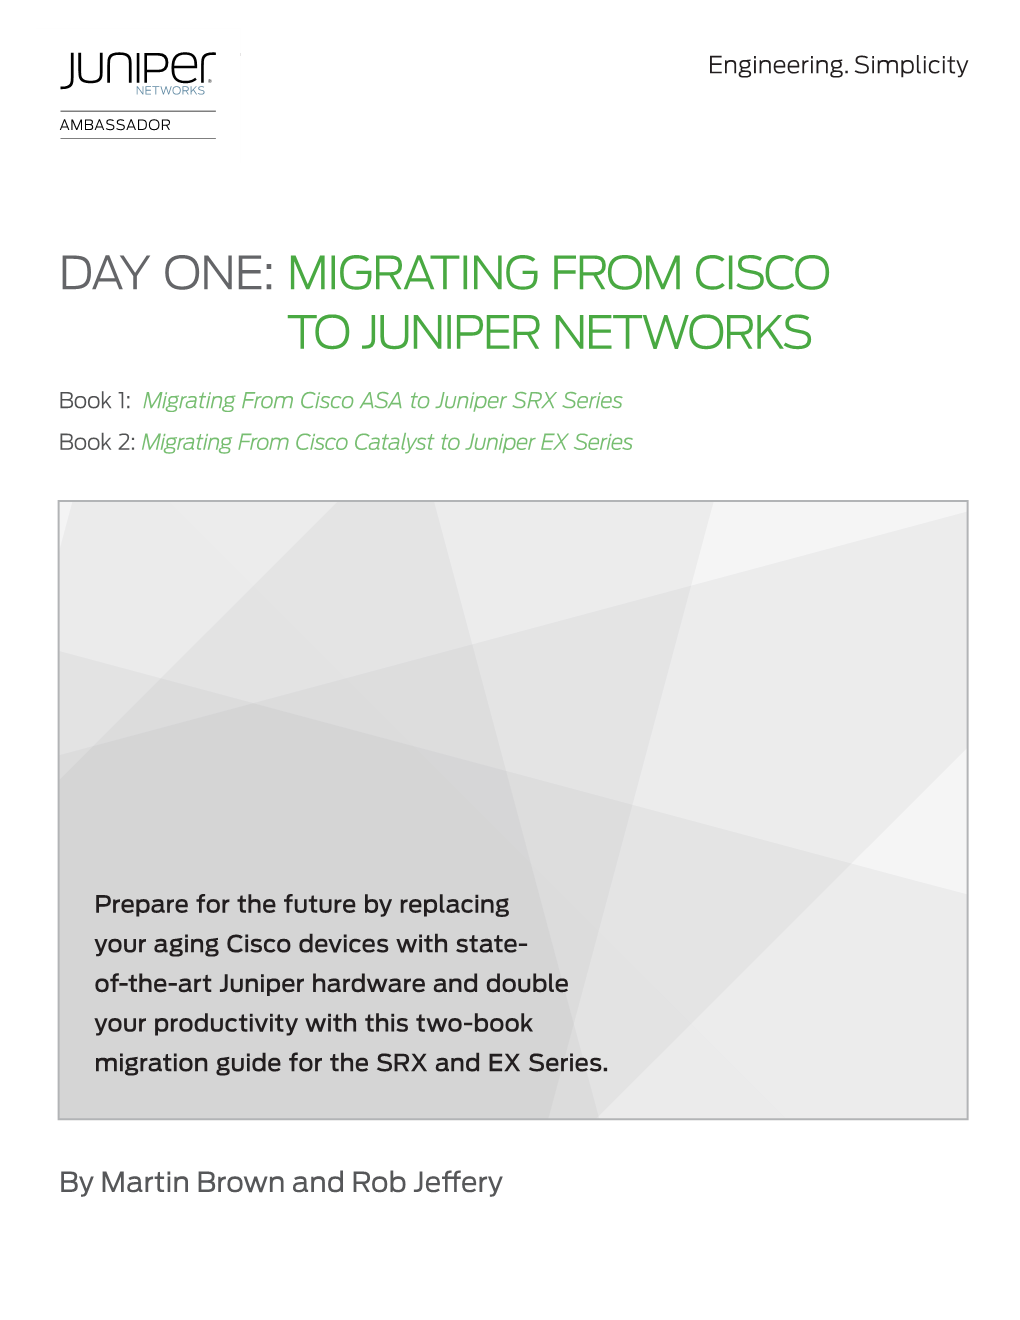 Day One: Migrating from Cisco to Juniper Networks